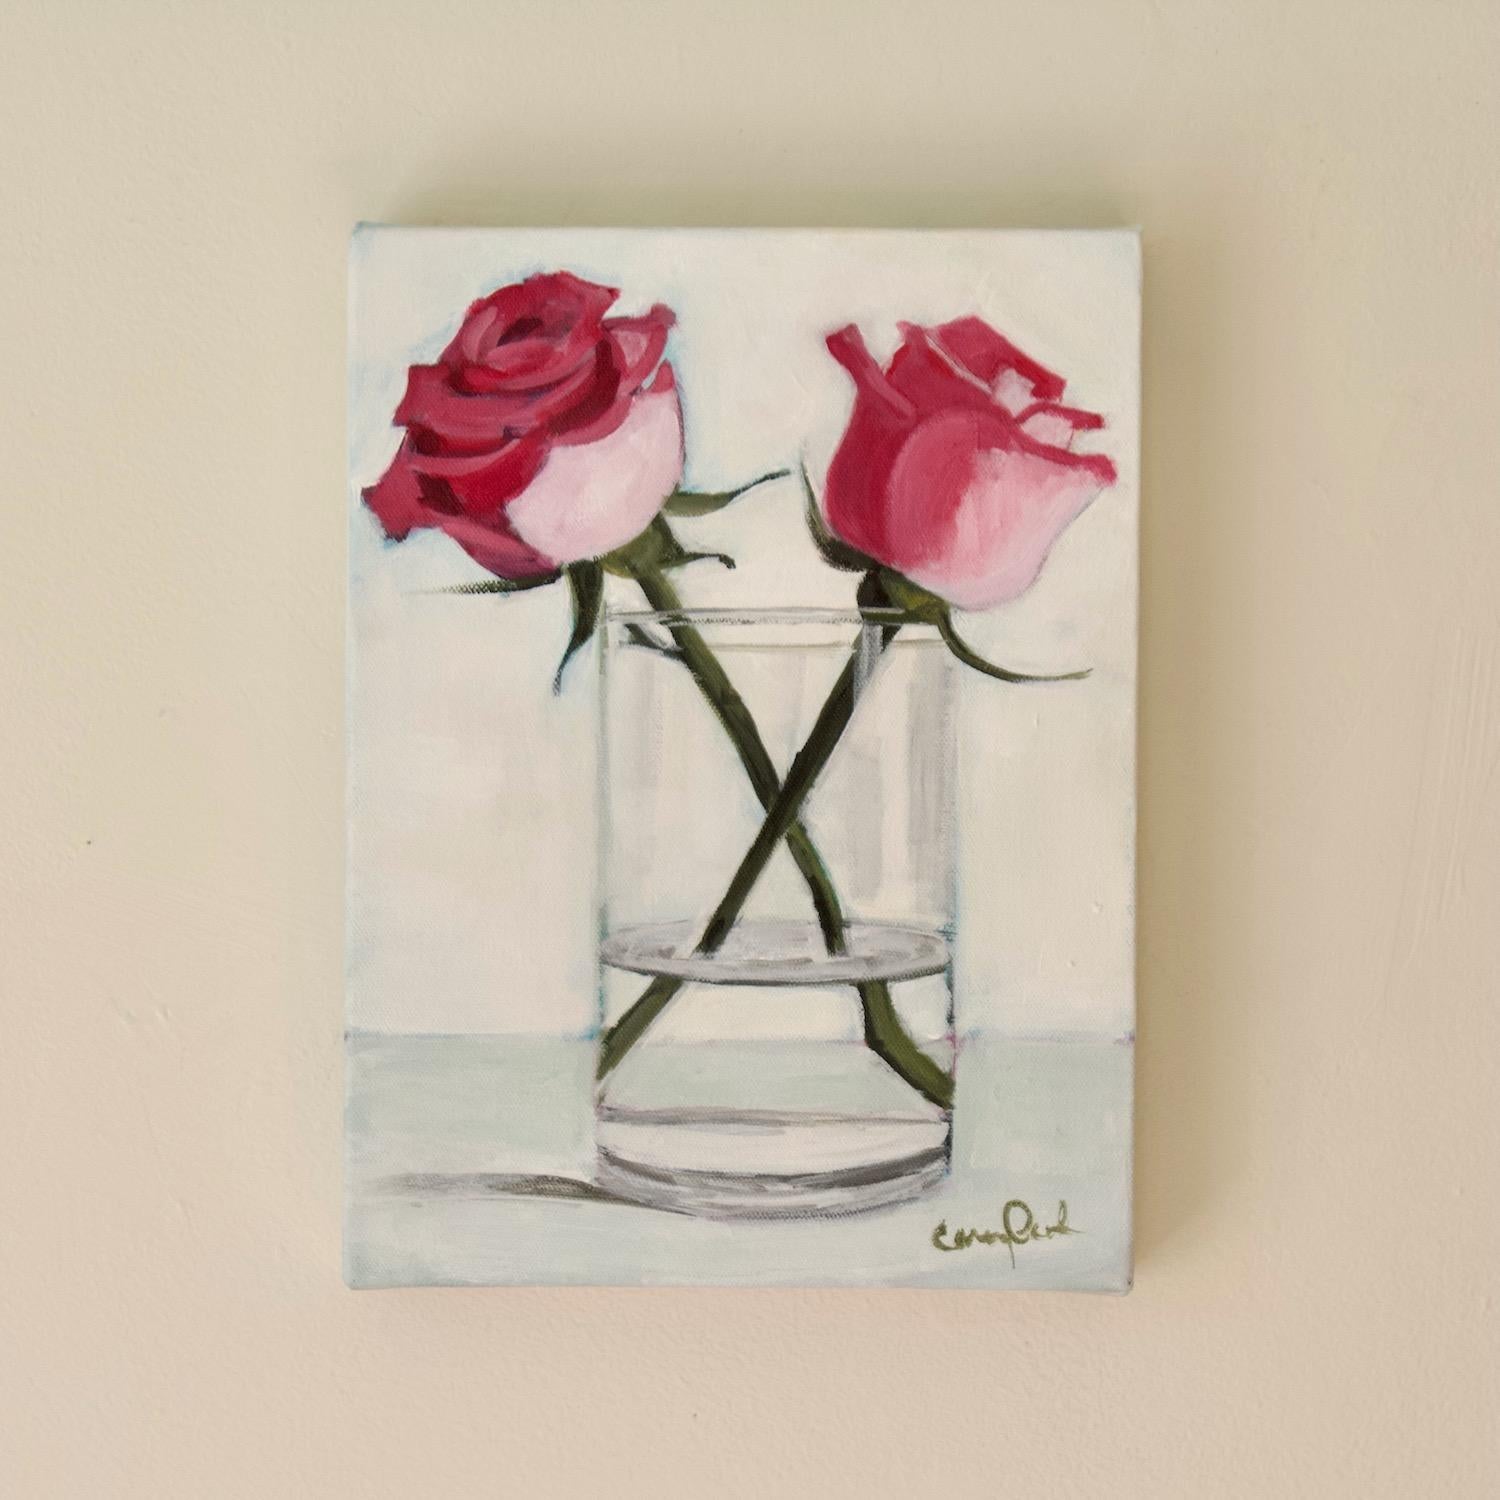 <p>Artist Comments<br />This still-life painting depicts two red roses in a vase. The rich hues of the flowers stand out against the transparent glass and subdued background. The simple impressionistic rendering of the elements imparts a sense of